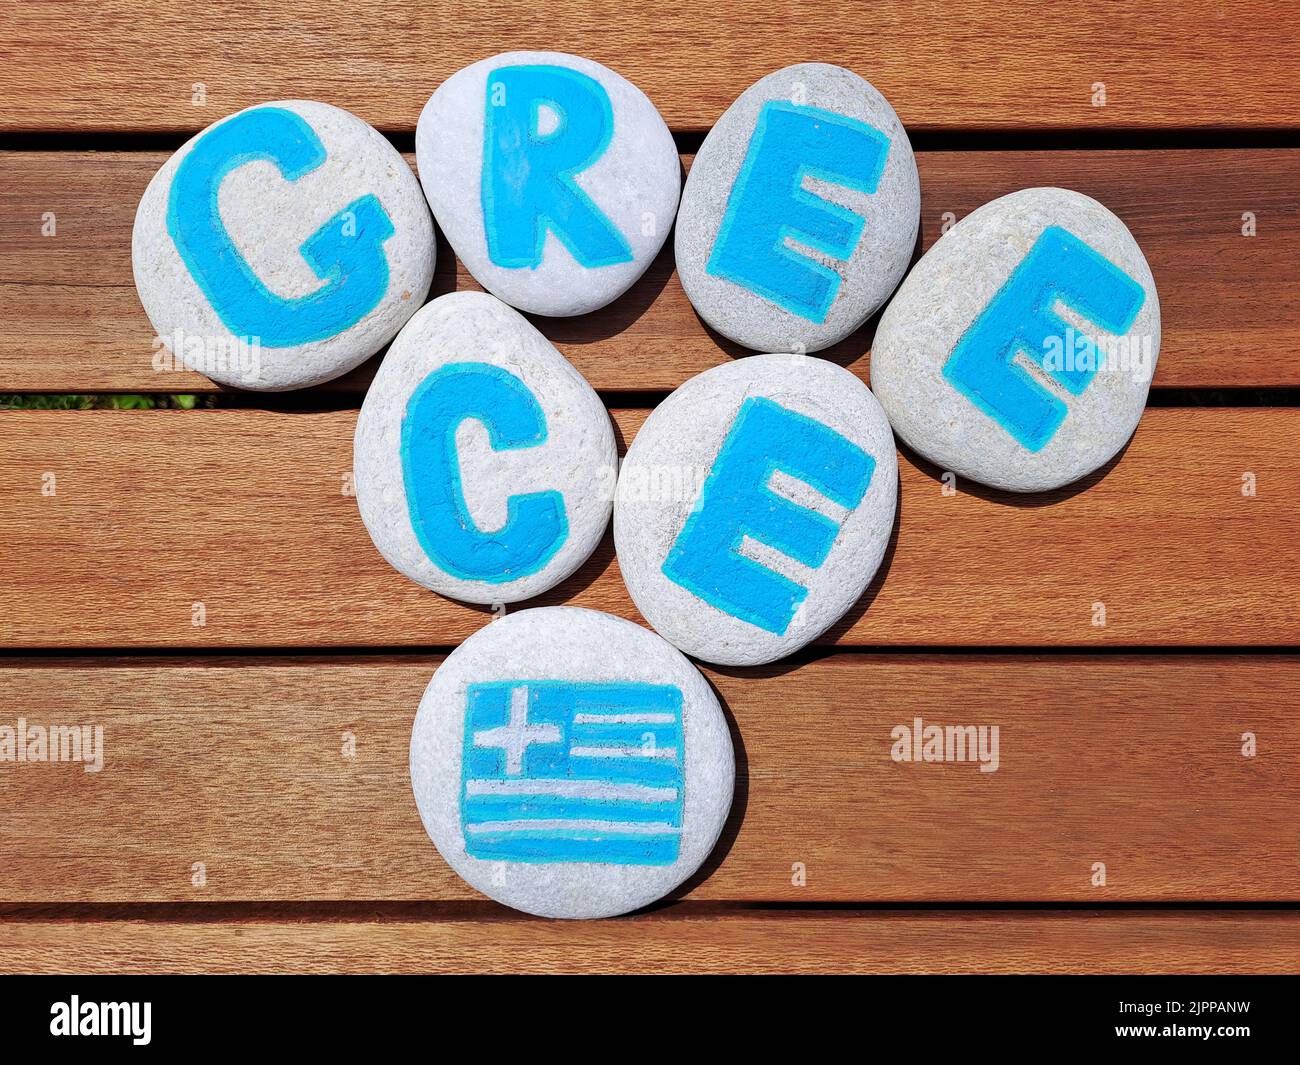 Greece country name painted on the stones on wooden plank background. Inskription on the sea stones. Stock Photo